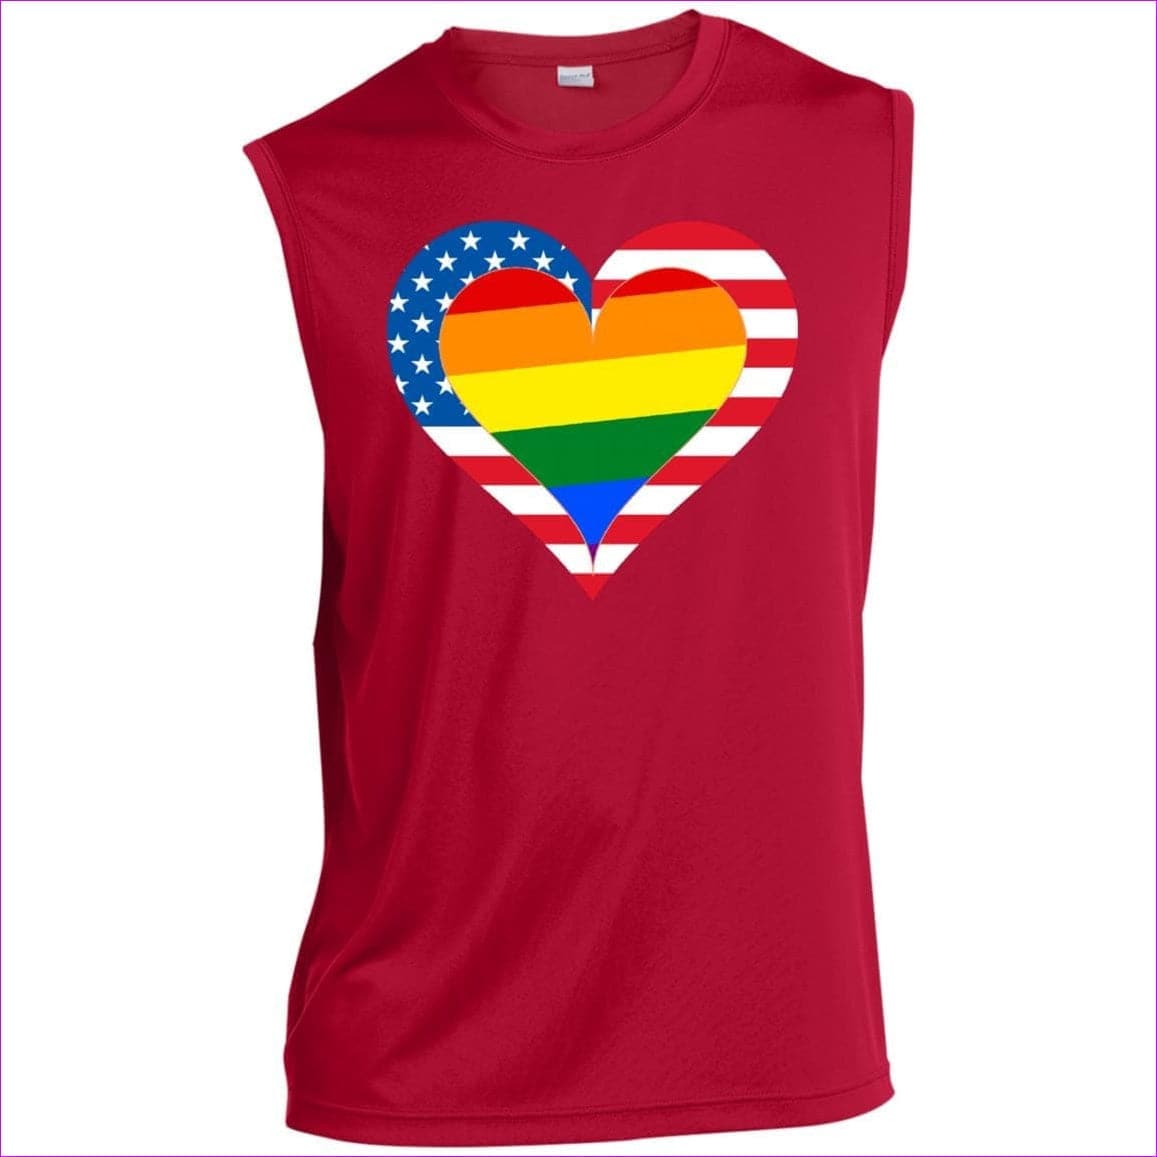 True Red - Country & Pride Love Men’s Sleeveless Performance Tee - mens tank top at TFC&H Co.